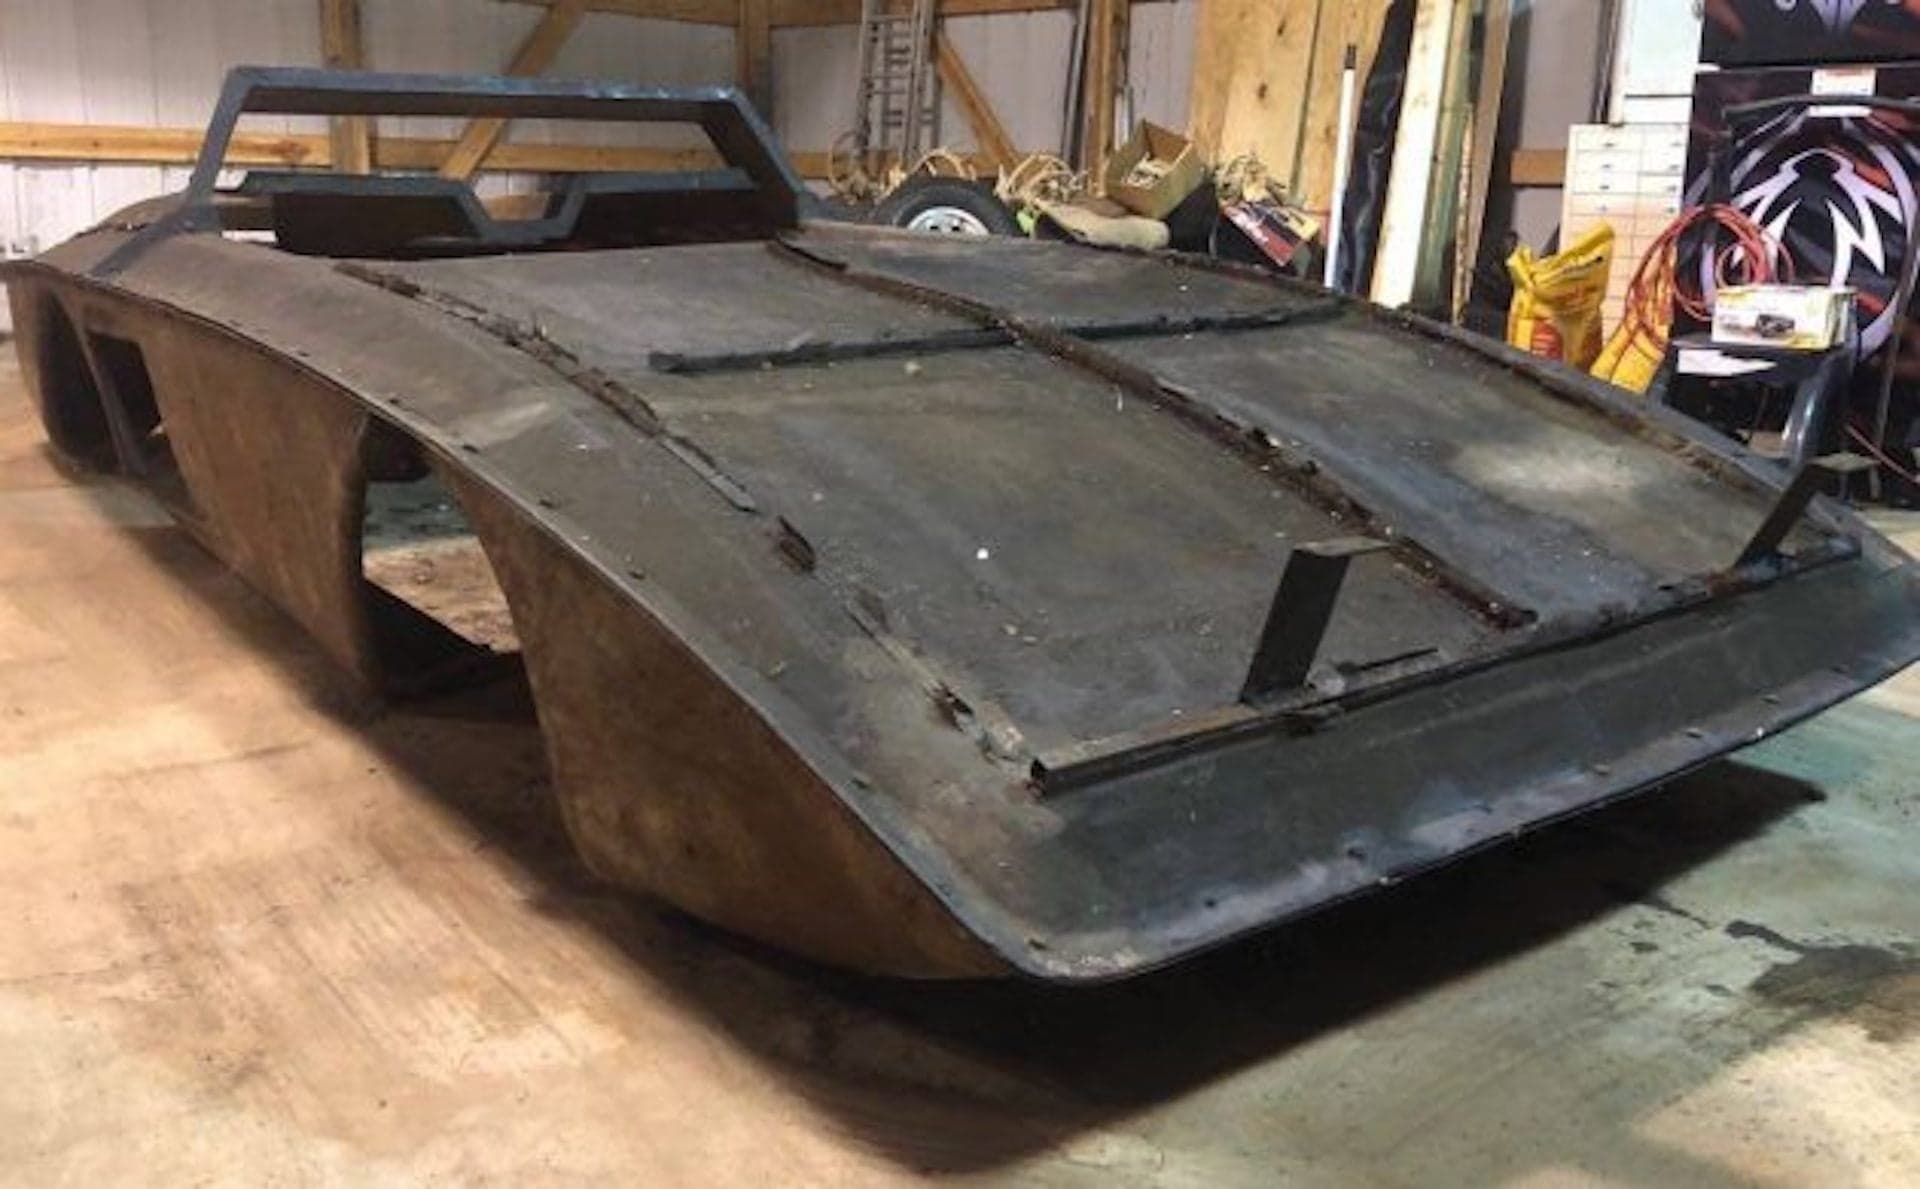 Original Molding for First-Ever Ford Mustang Concept Unearthed, Listed for Sale Online